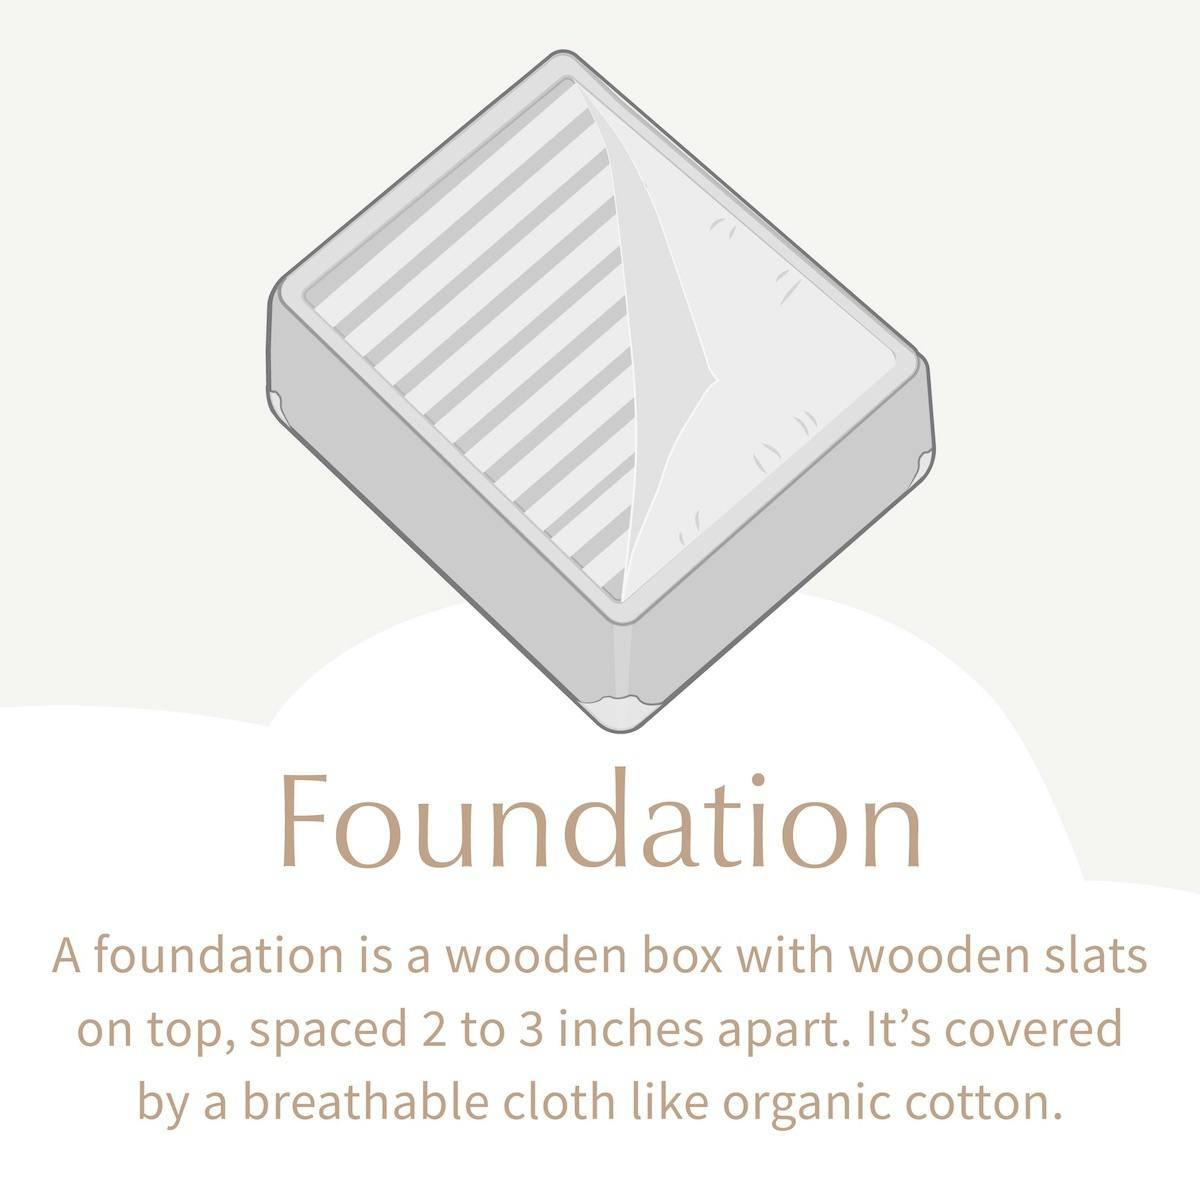 Illustration of a foundation with a description underneath: 